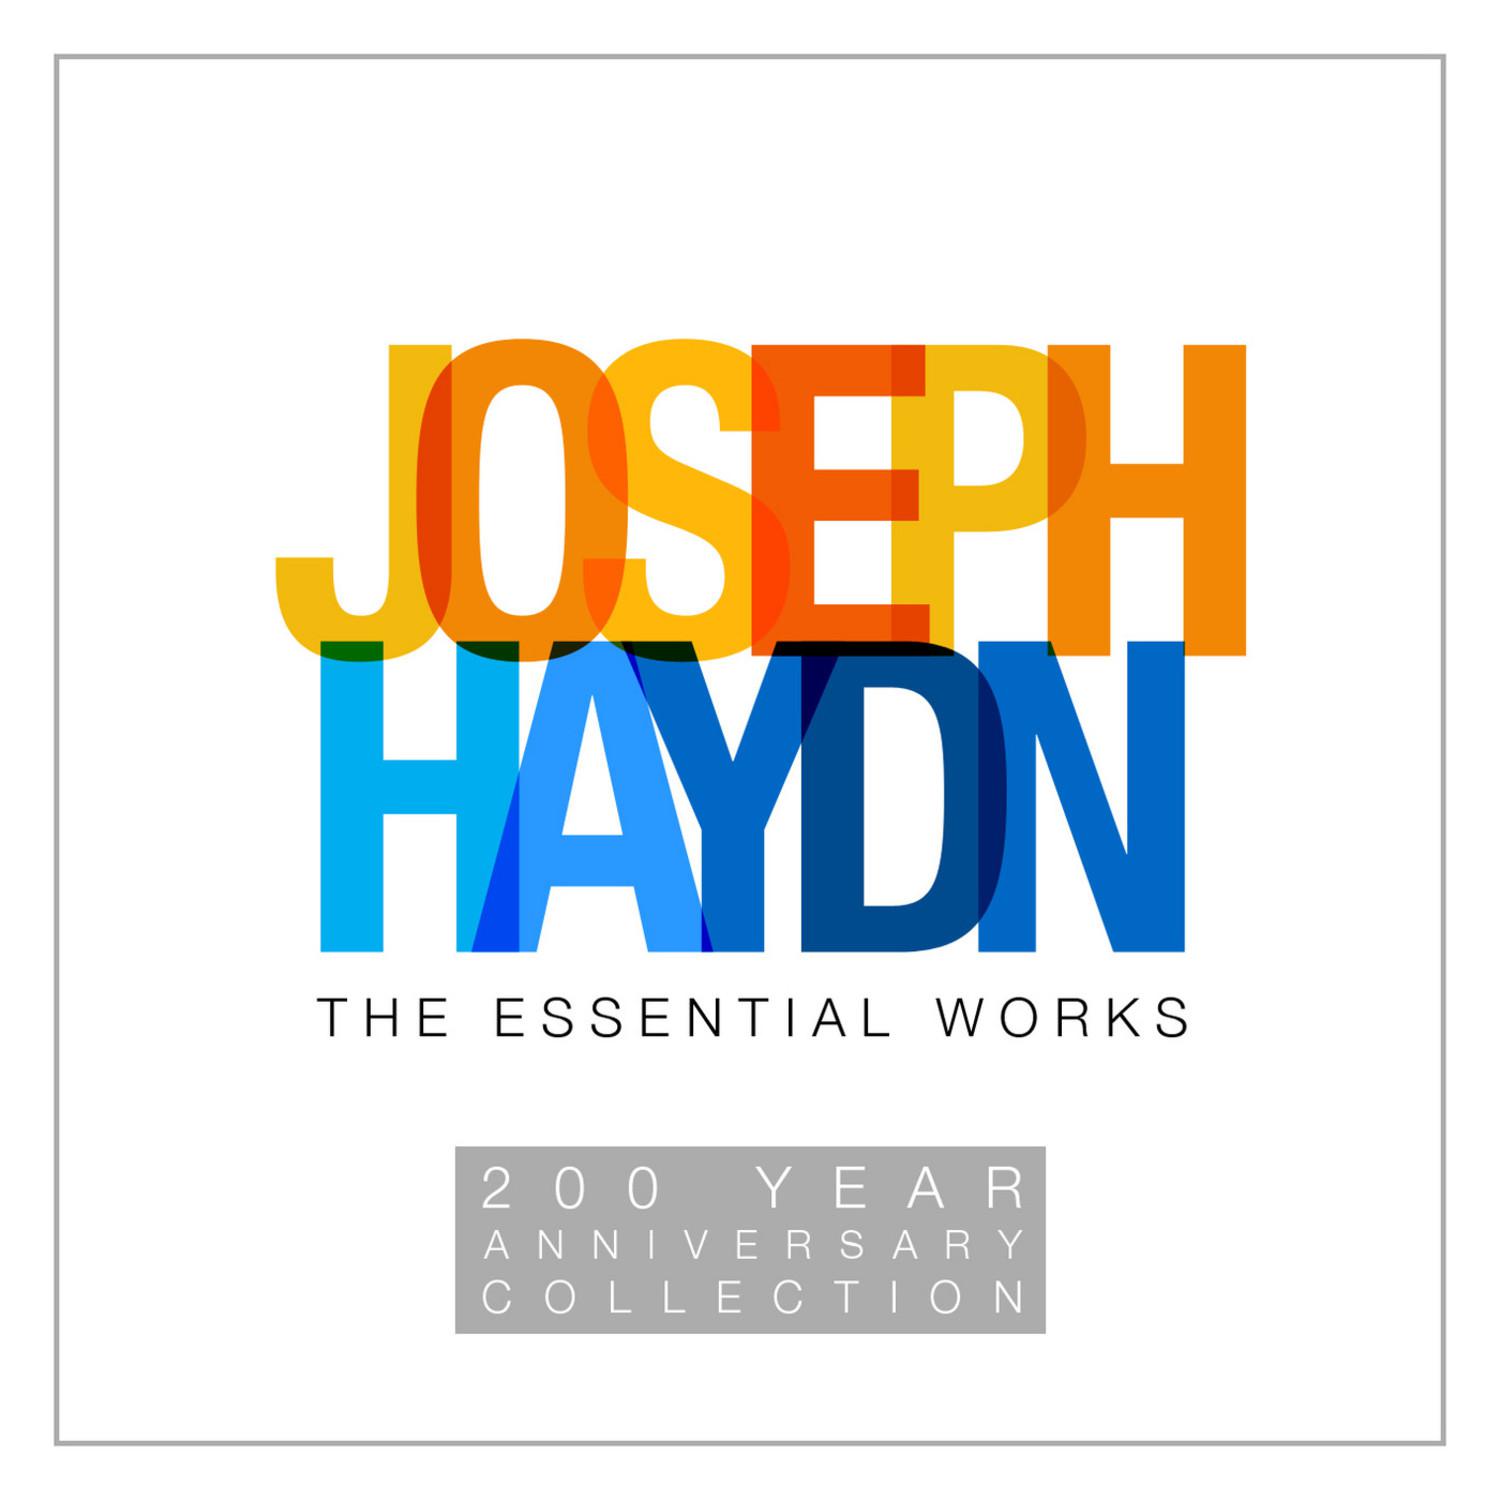 Joseph Haydn: The Essential Works - 200 Year Anniversary Collection